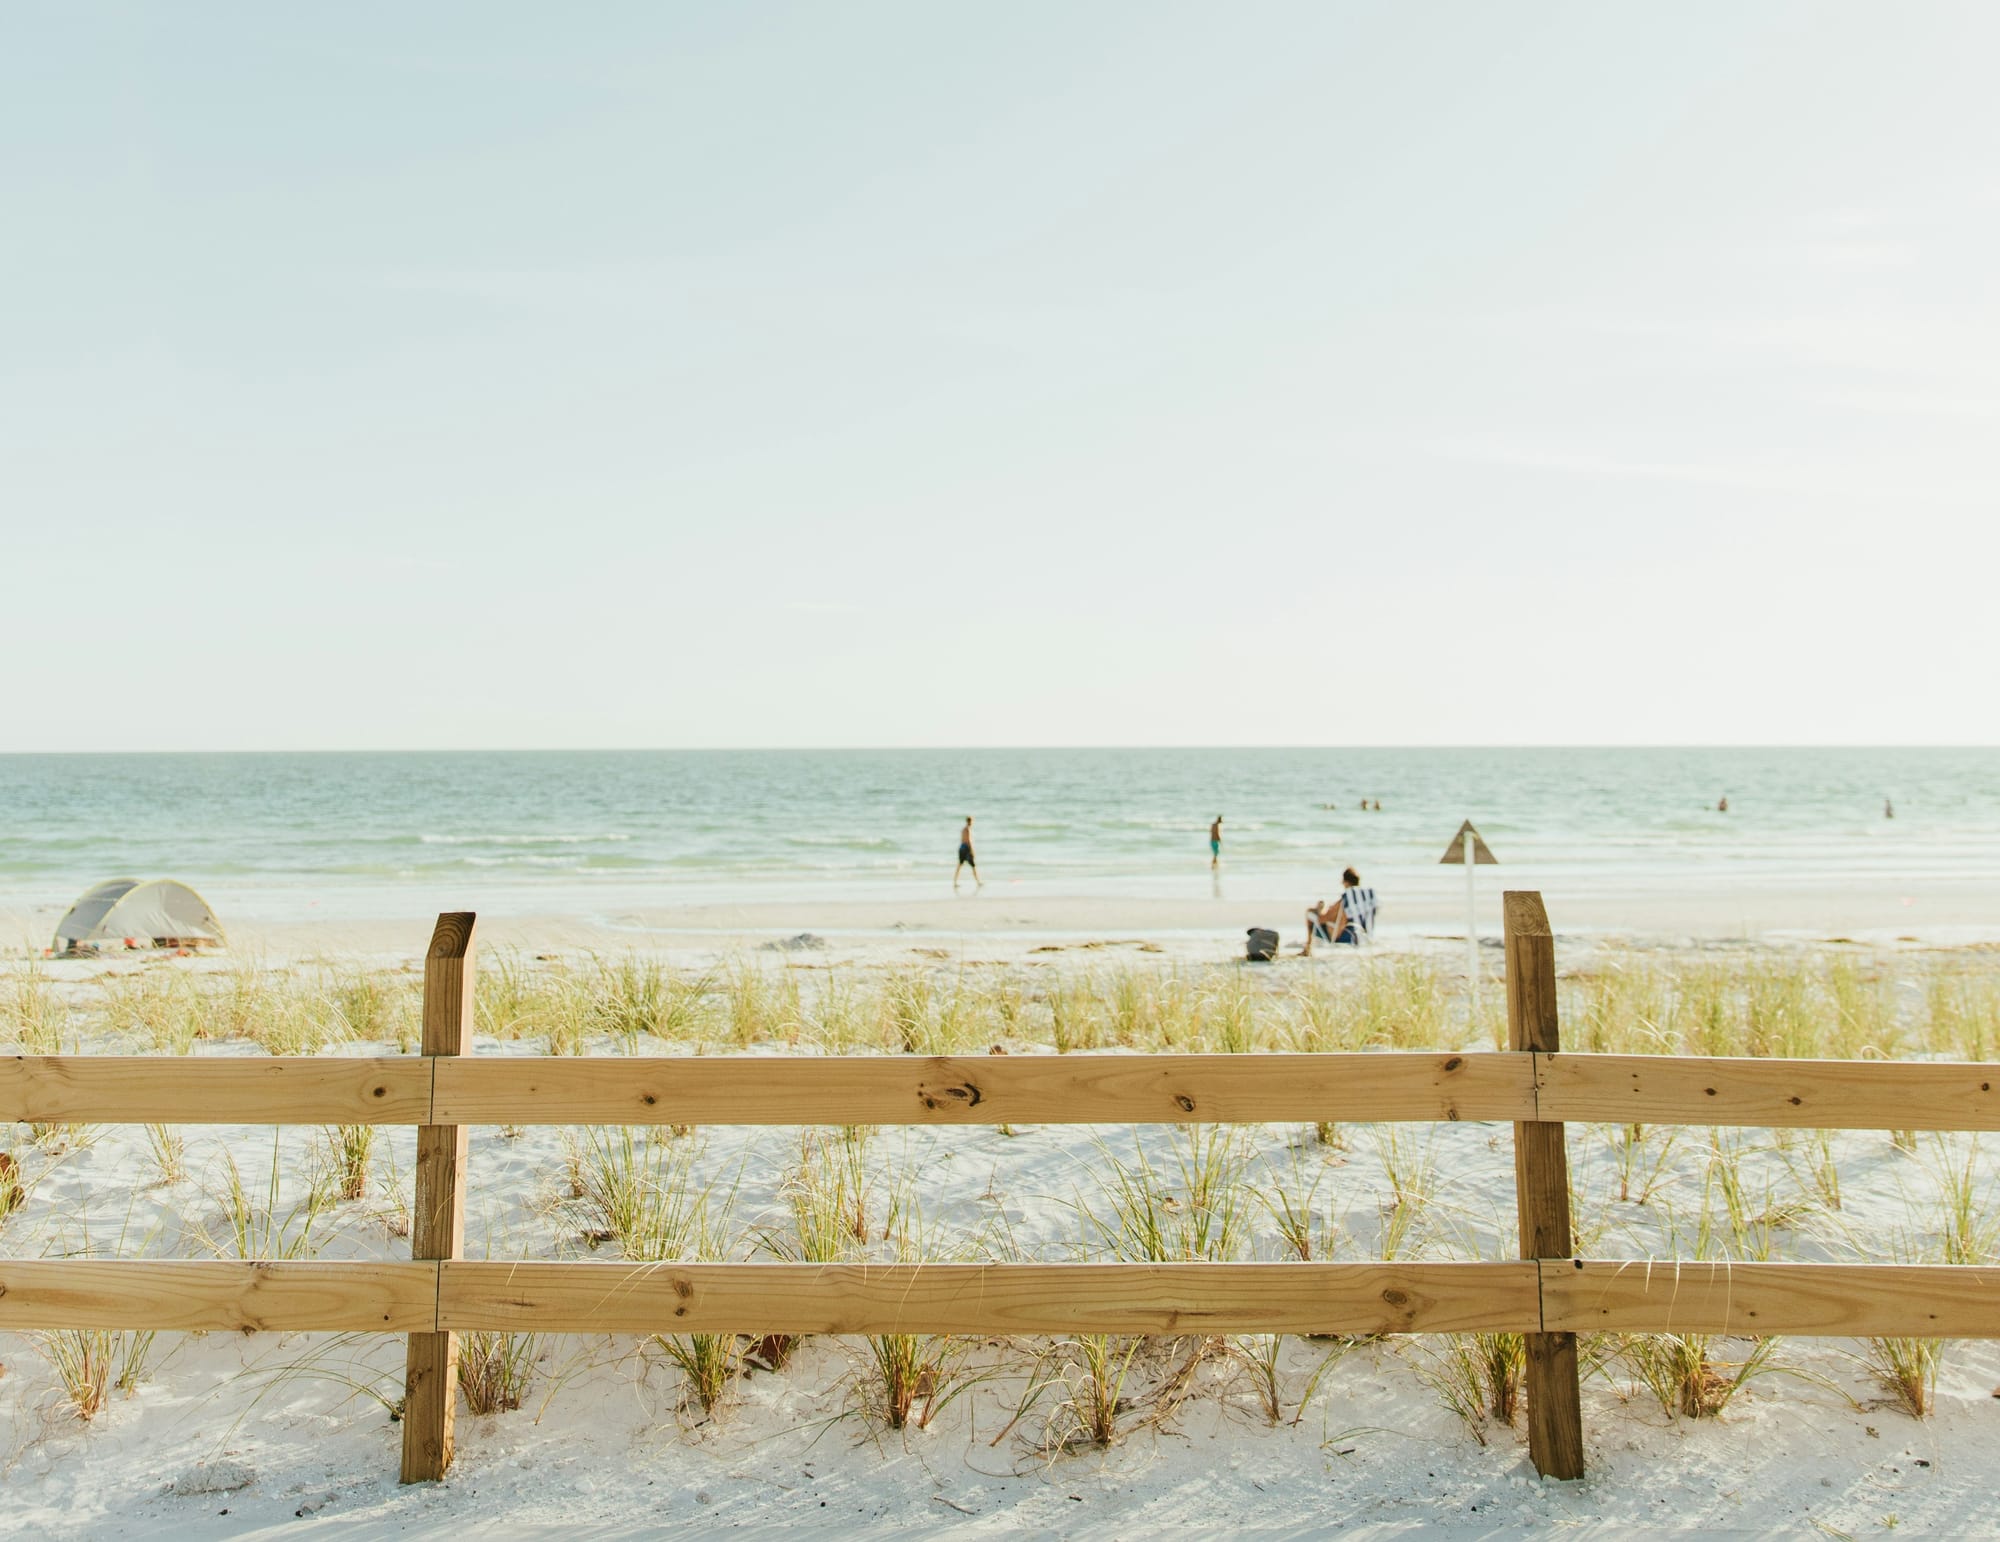 Honeymoon Island State Park: Escape to Bliss